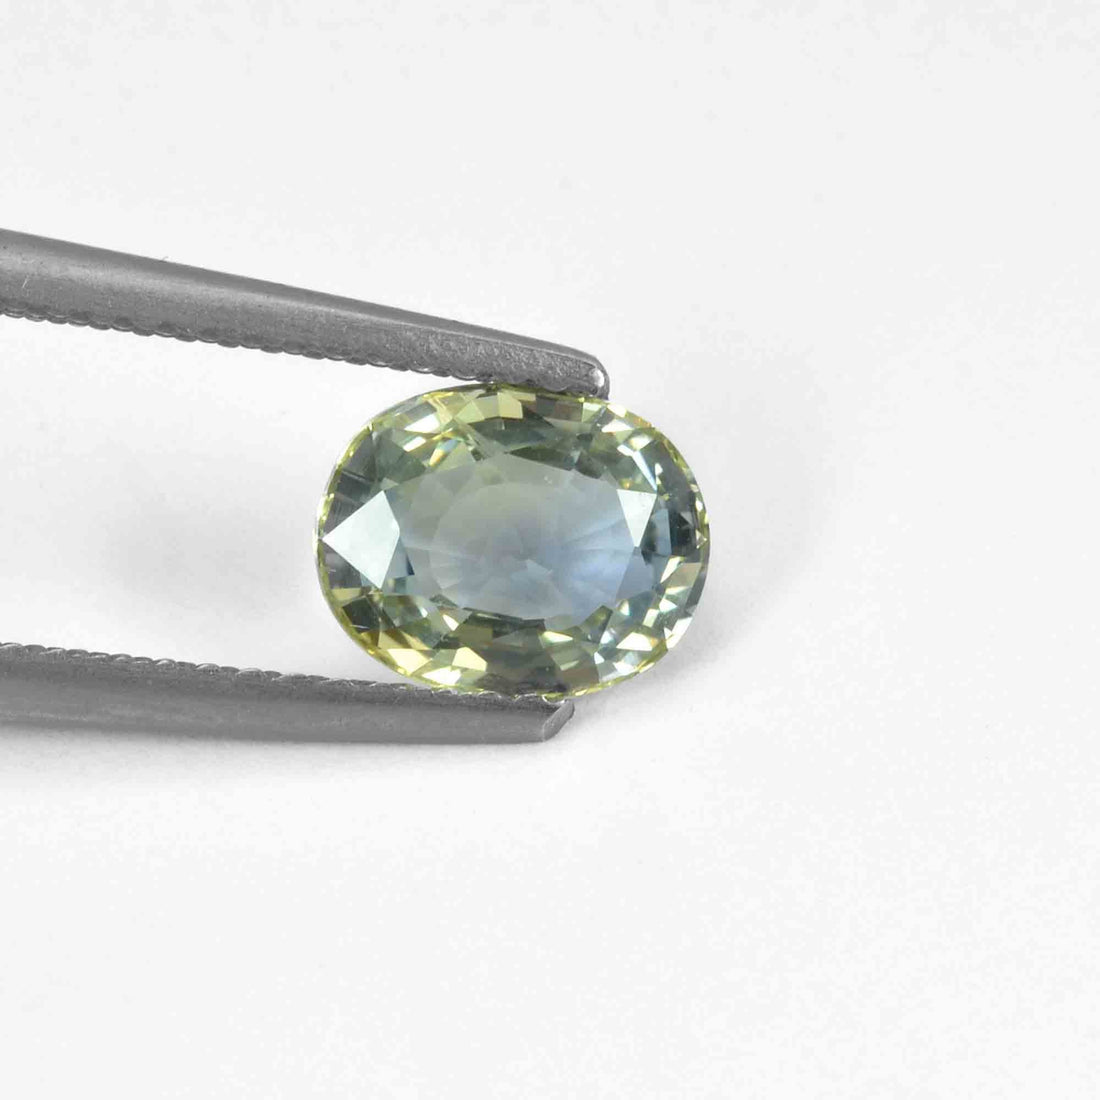 1.50 Cts Natural Bi-color Sapphire Loose Gemstone Oval Cut